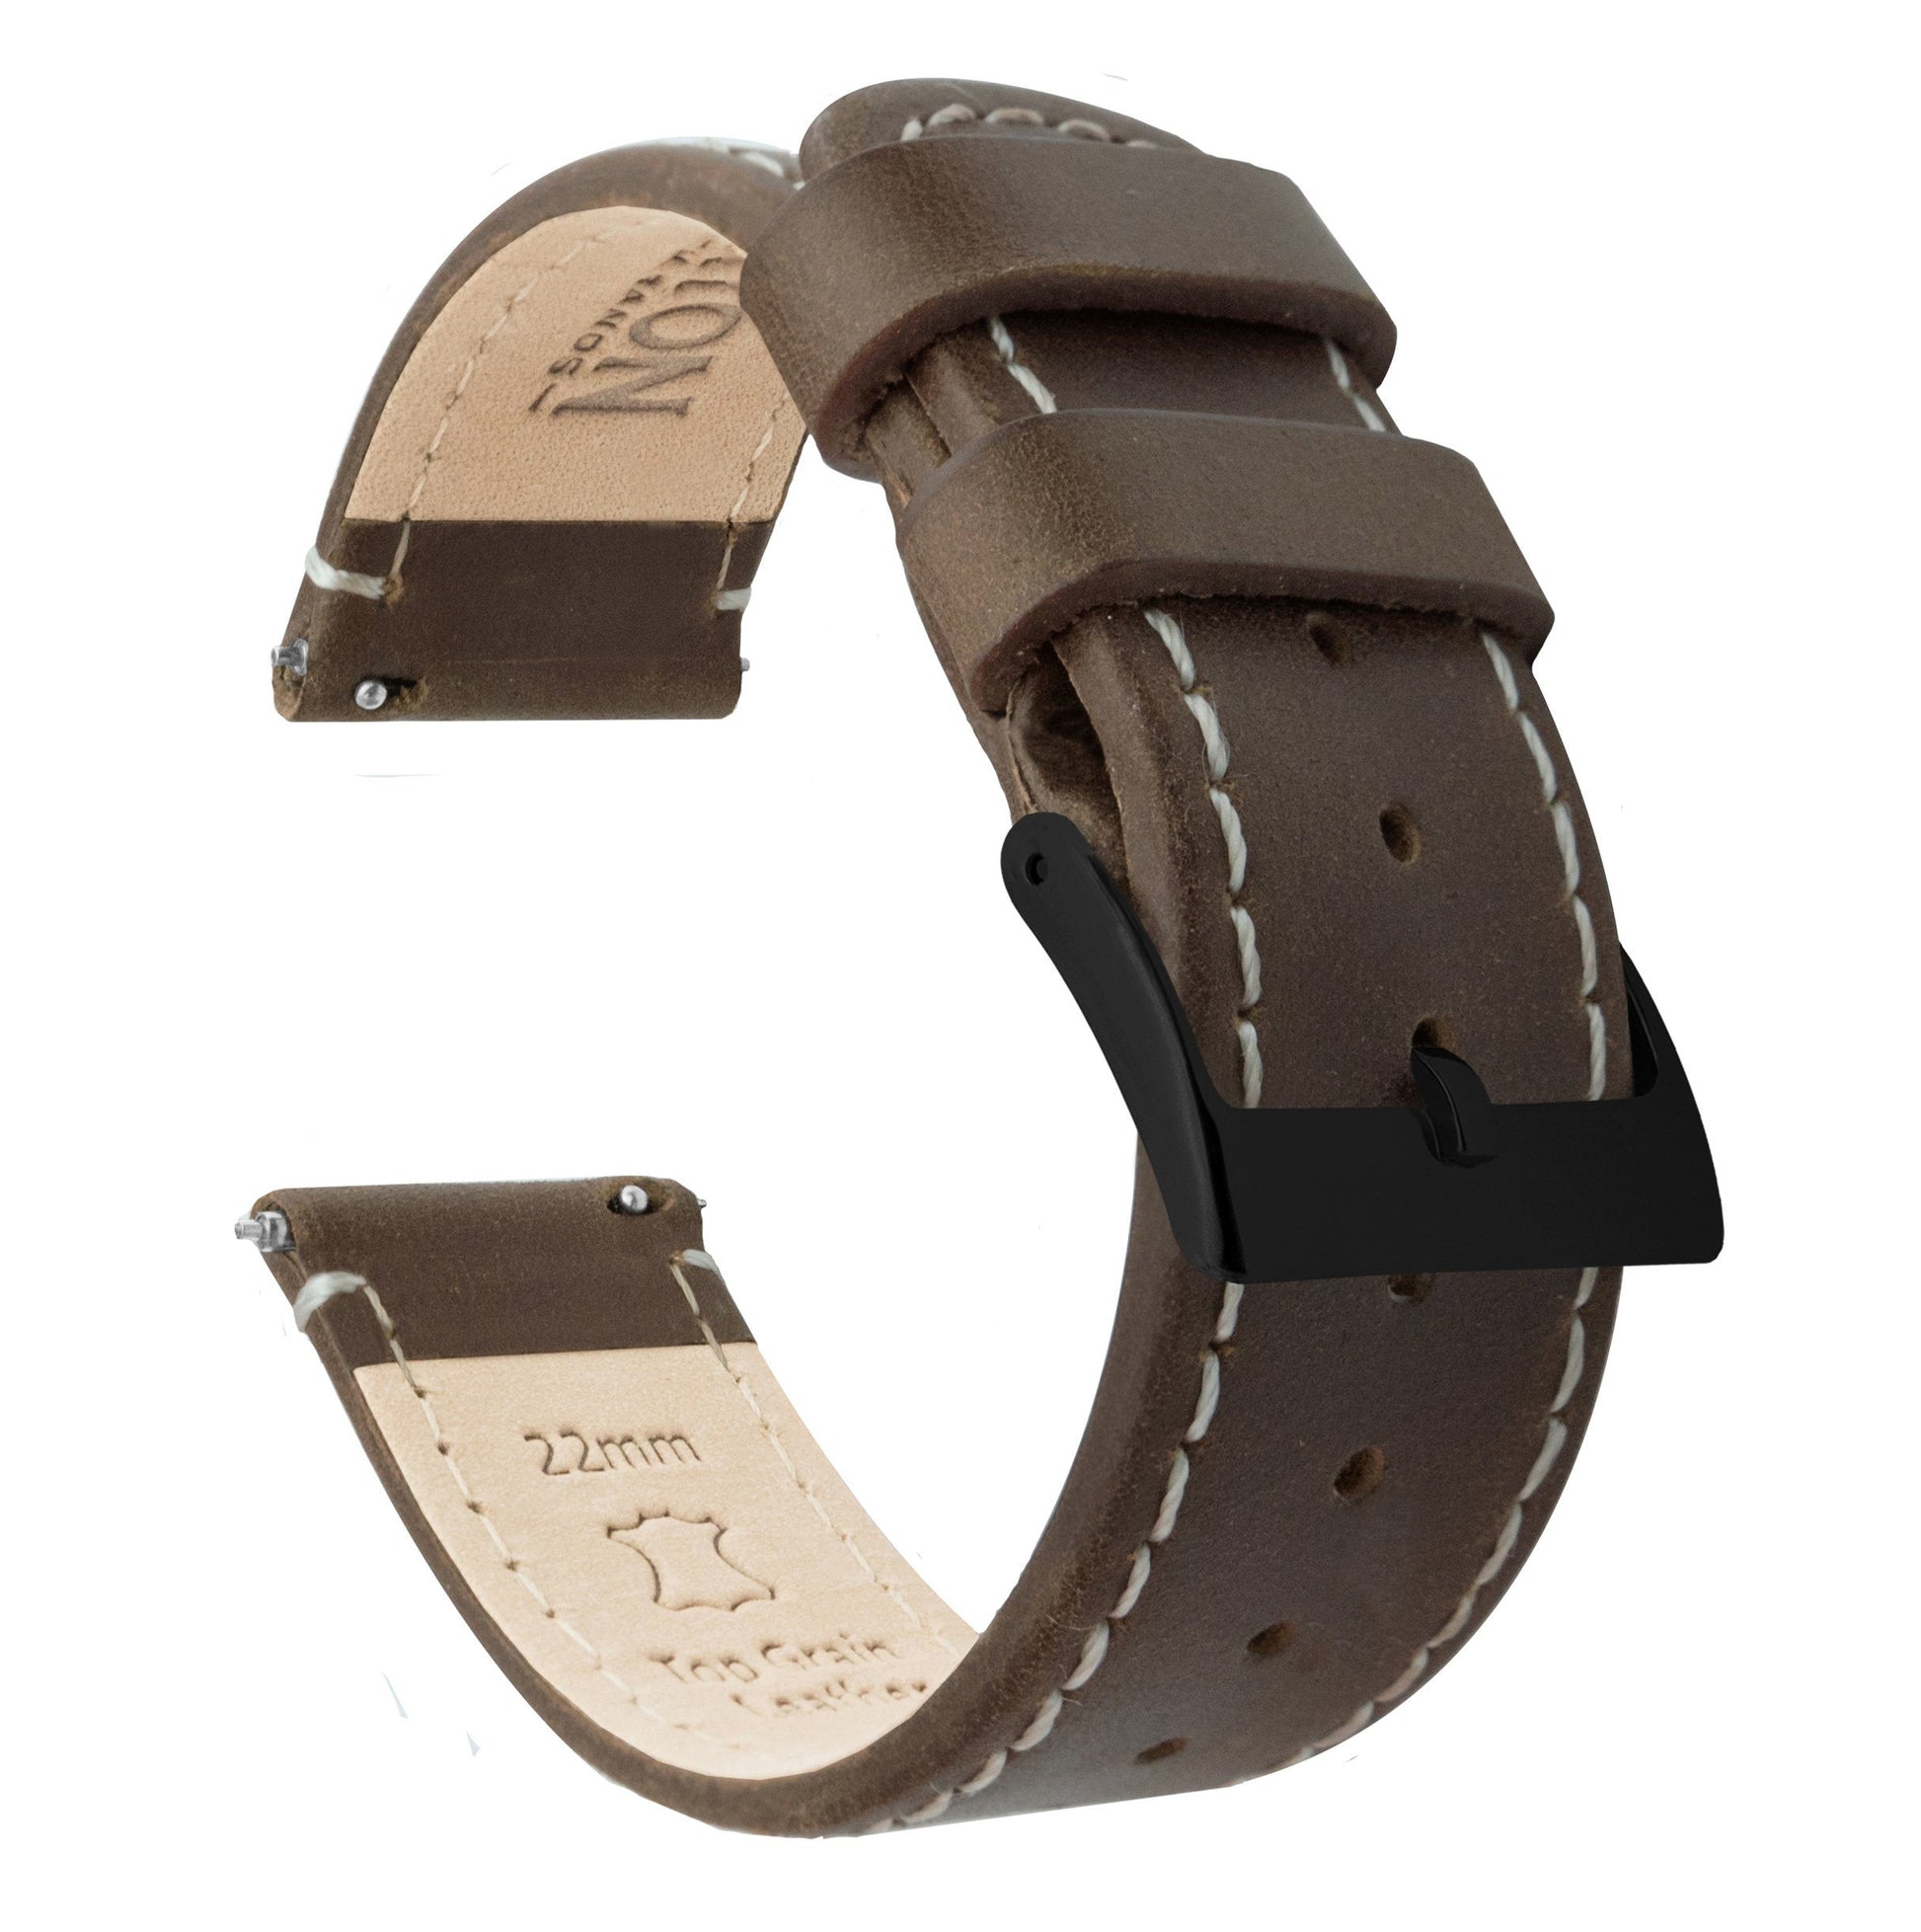 Samsung Galaxy Watch Active 2 | Saddle Brown Leather & Linen White Stitching - Barton Watch Bands